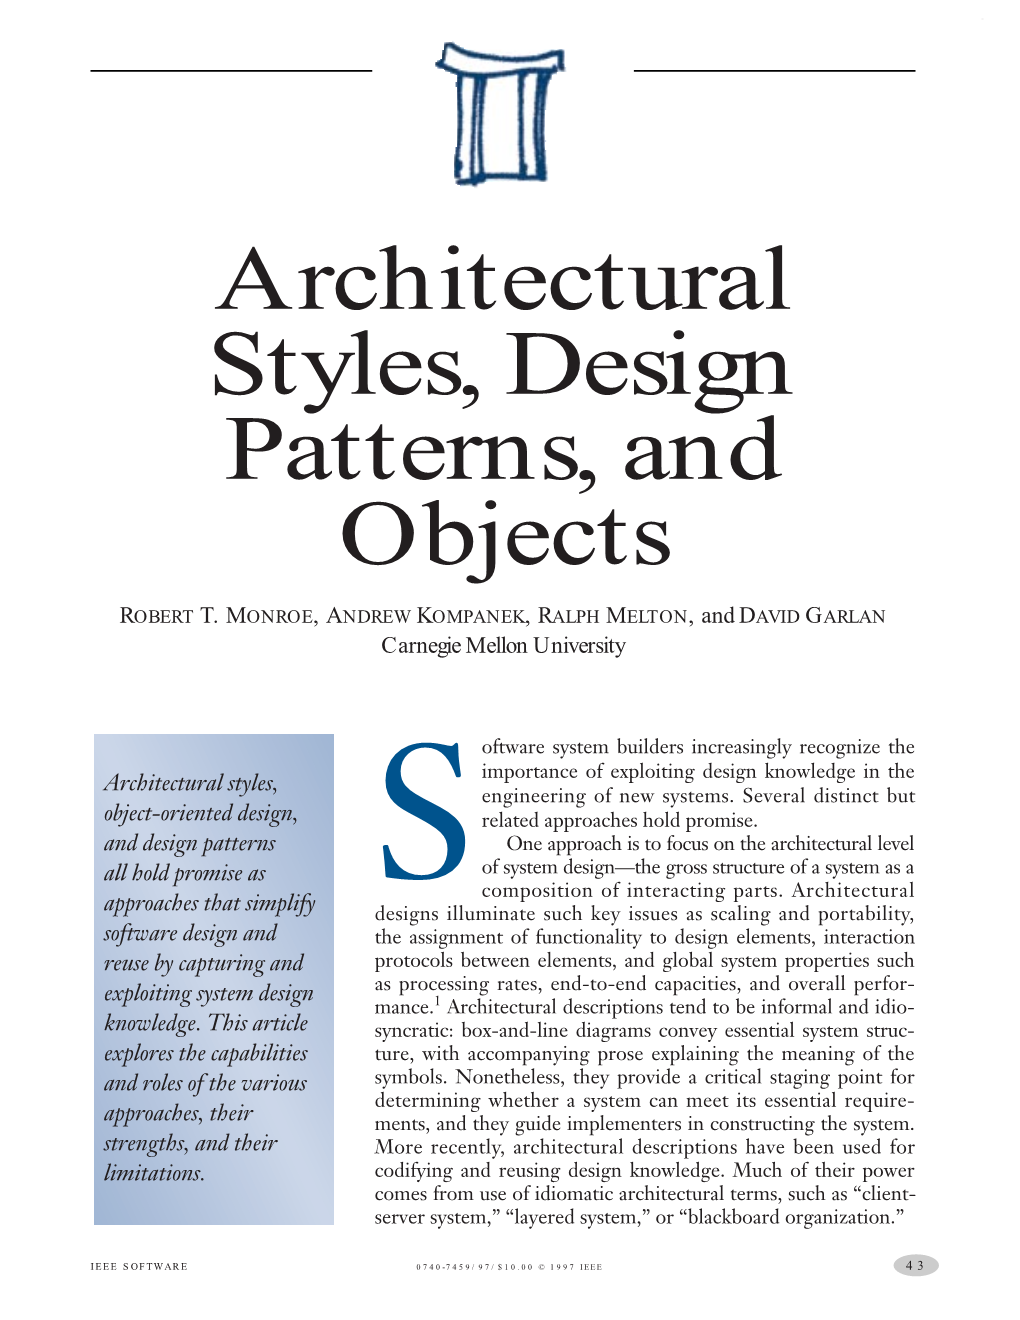 Architectural Styles, Design Patterns, and Objects